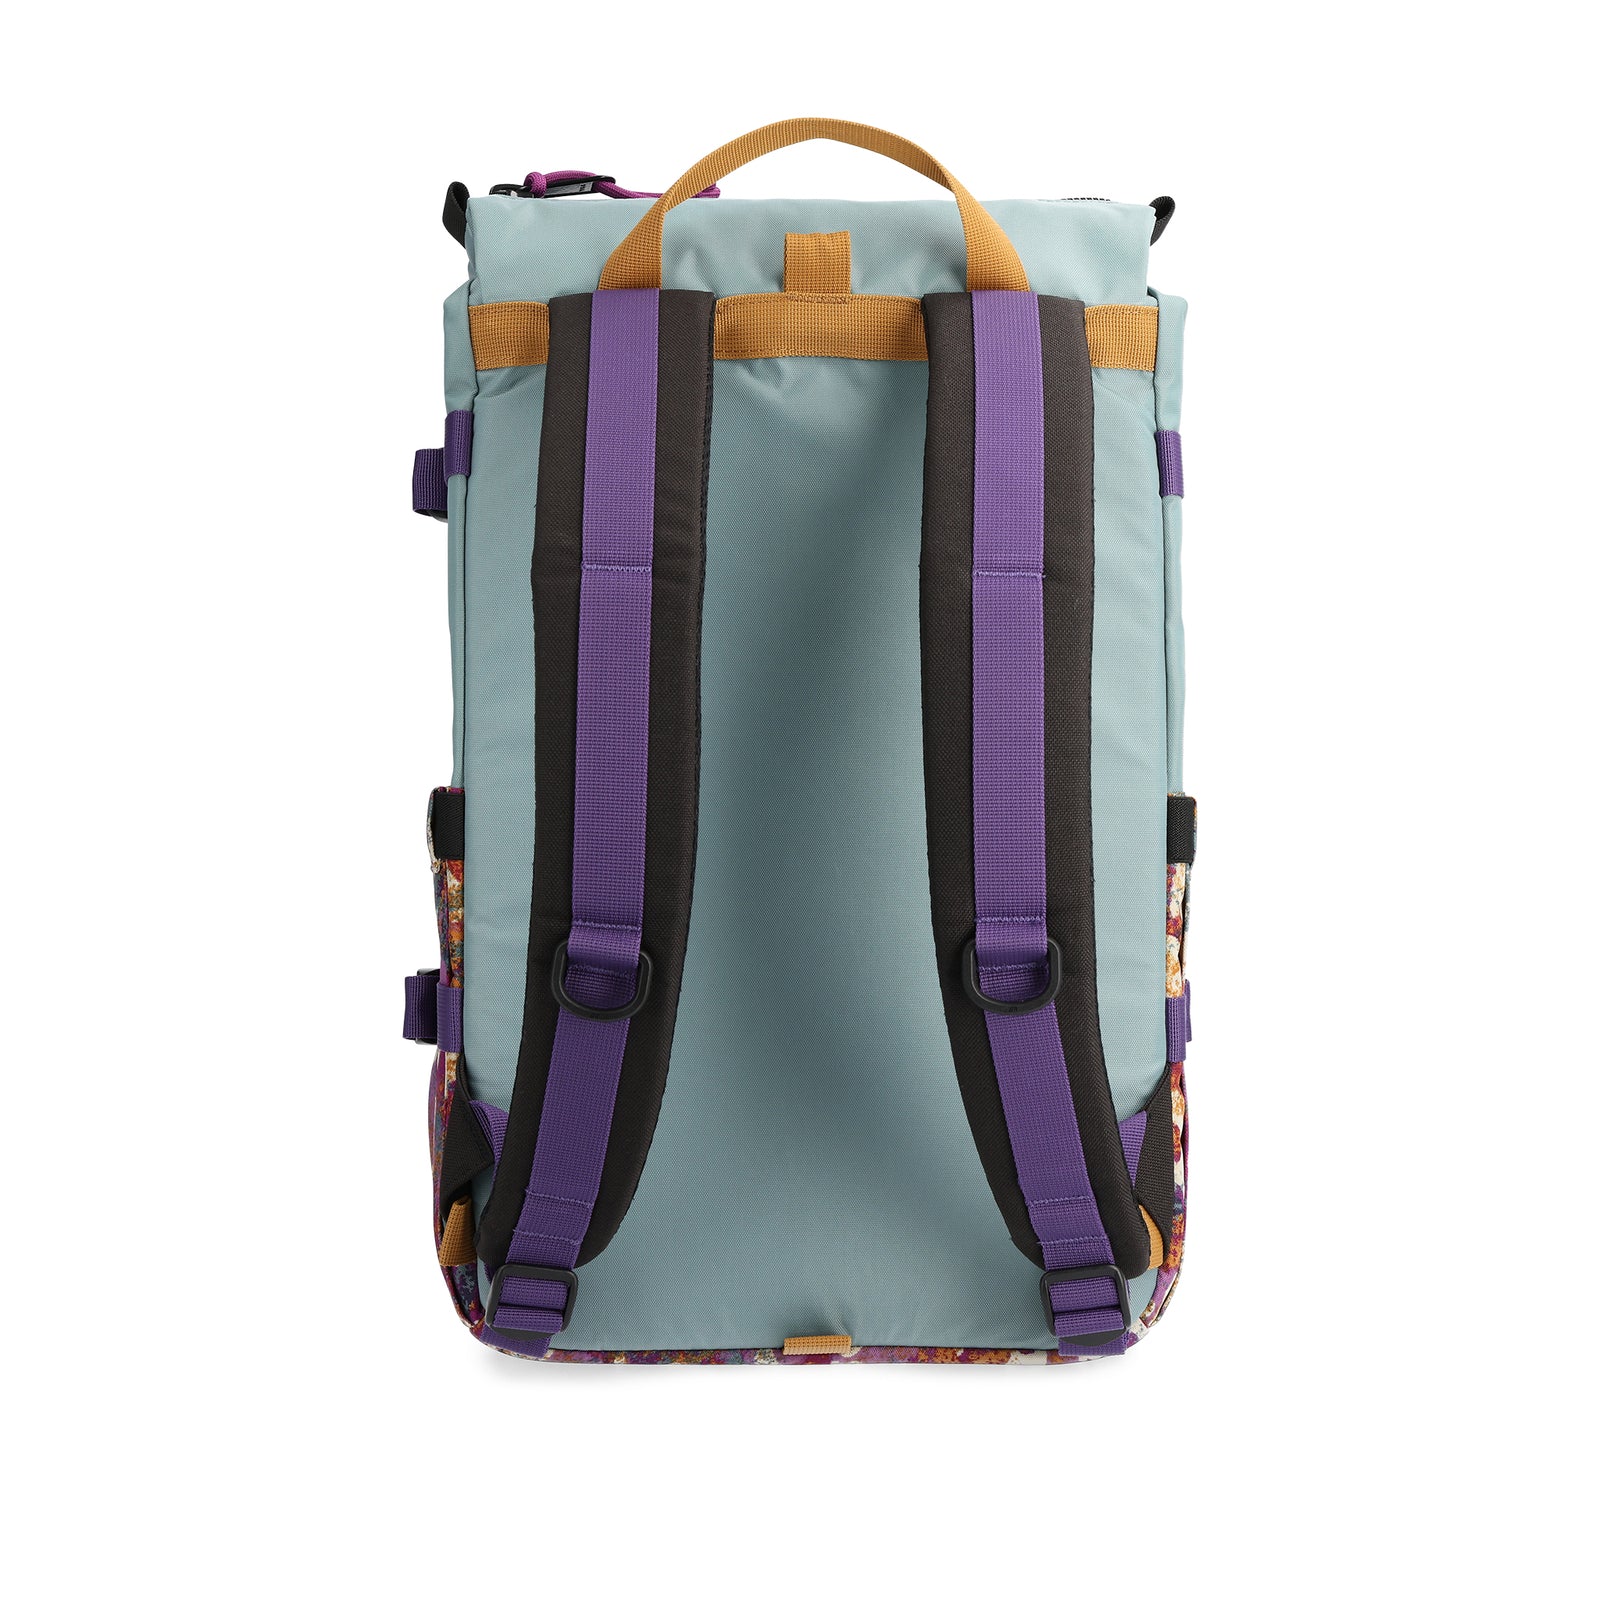 Back View of Topo Designs Rover Pack Classic in "Slate Blue / Khaki Celestial"